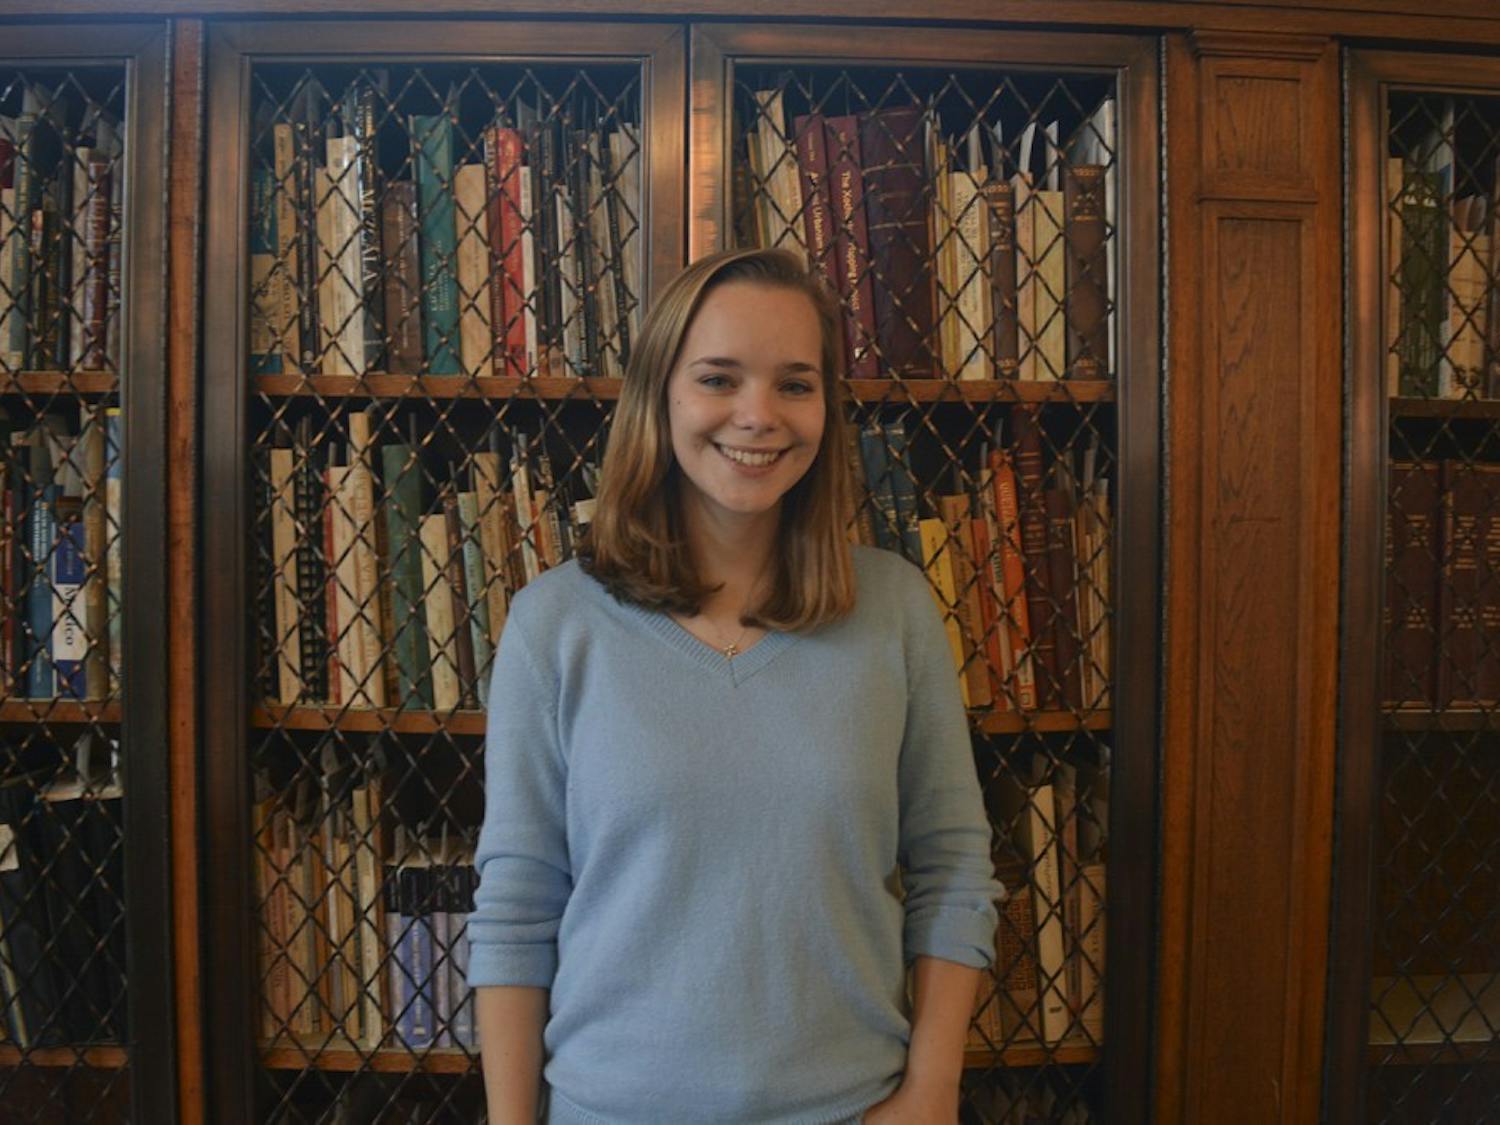 UNC sophomore, Grace Towery, wrote a paper for English 120, using the rare book collection in Wilson Library, that is now being published in a humanities journal